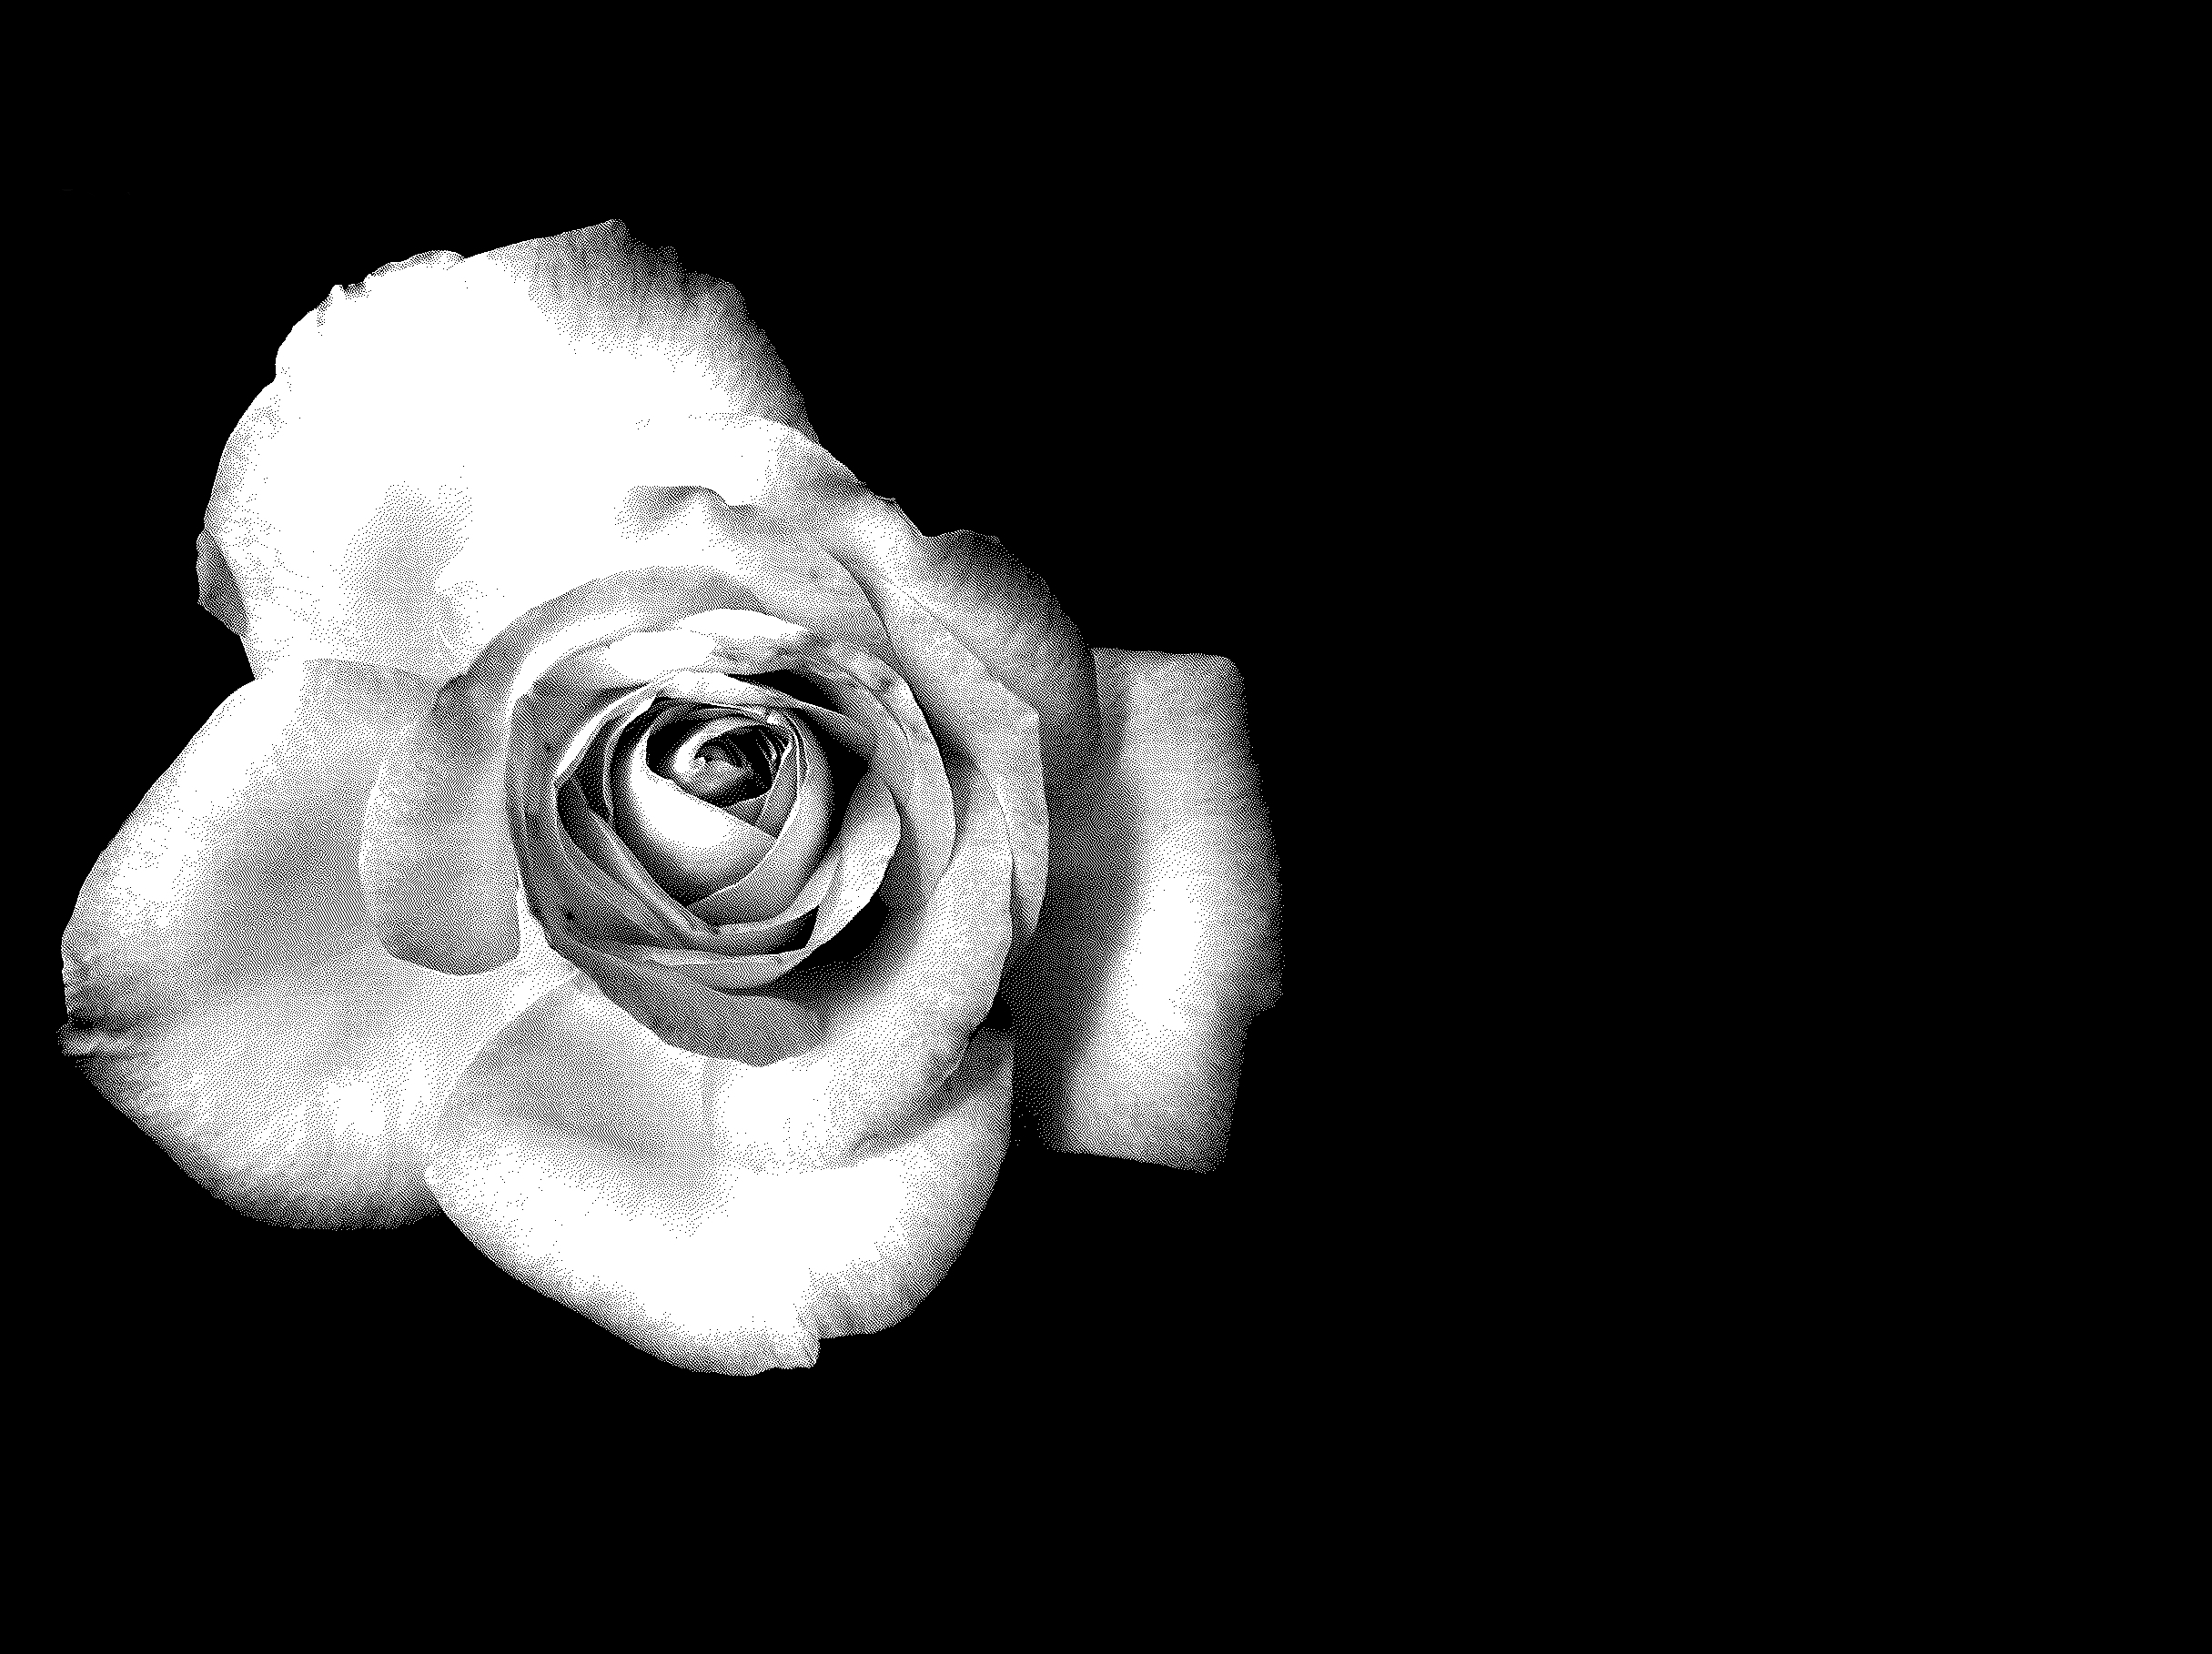 2431x1818 Free Black And White Roses Wallpaper, Download Free Black And White Roses Wallpaper png images, Free ClipArts on Clipart Library